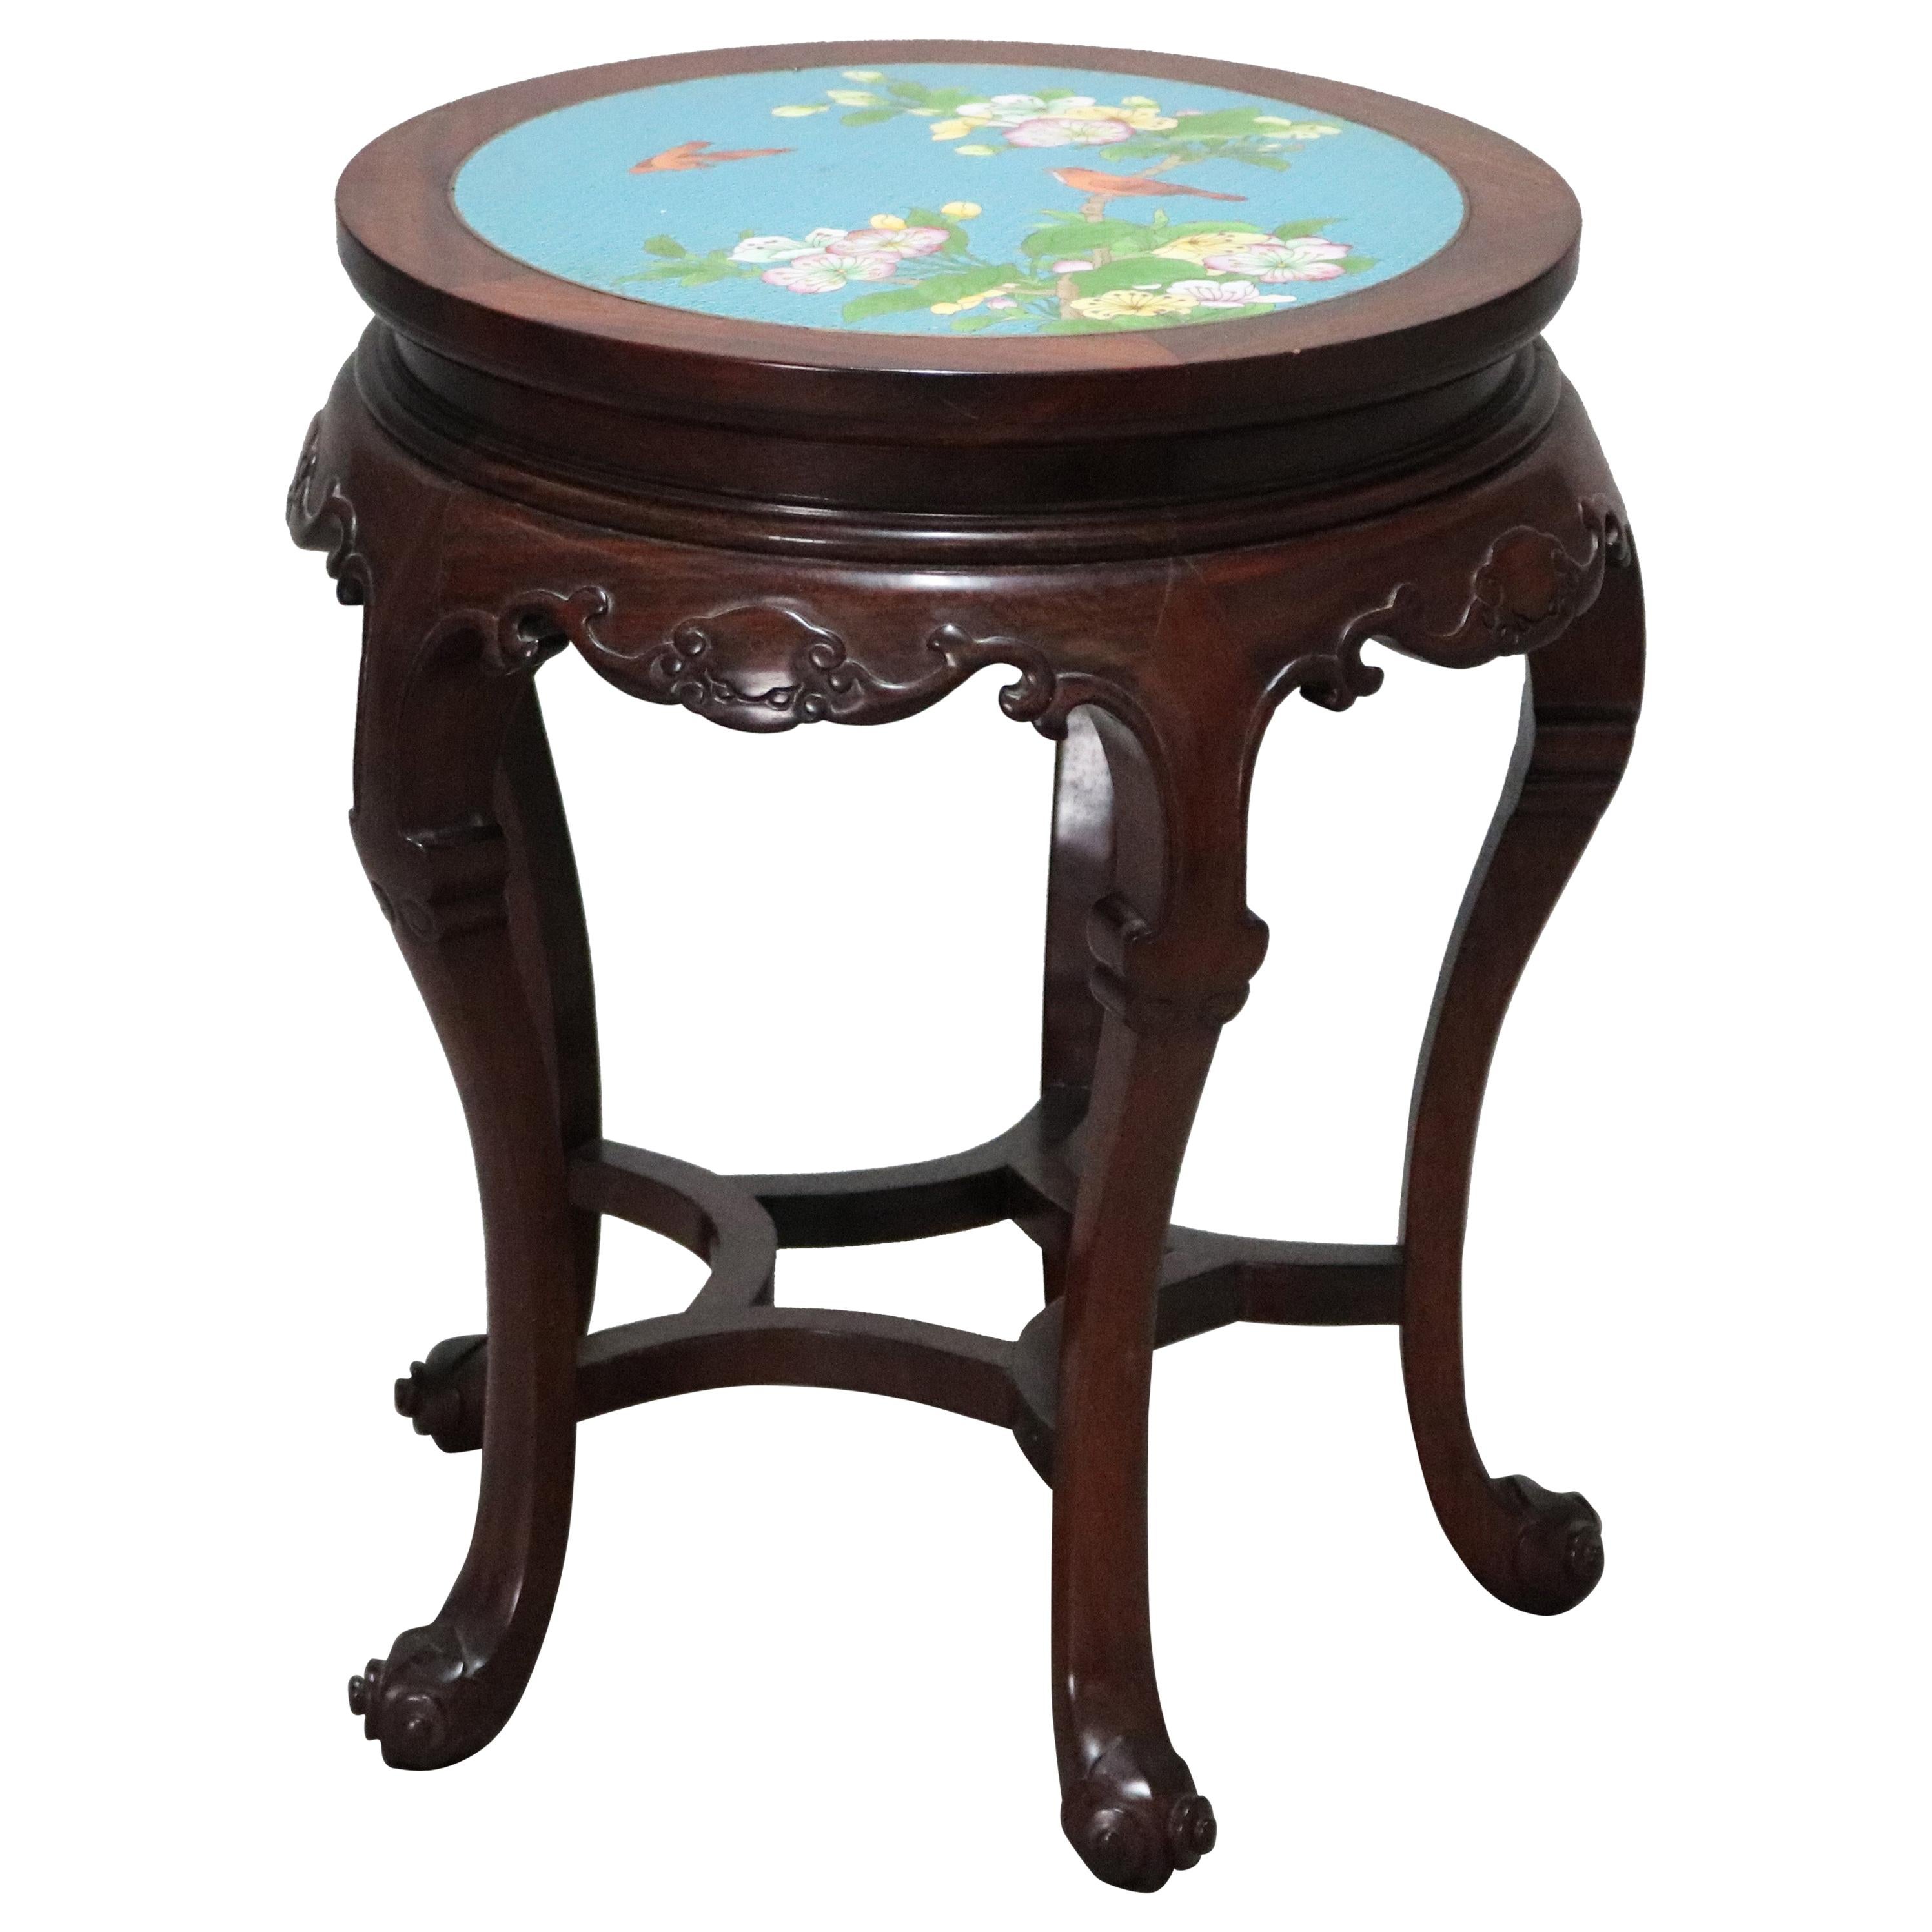 Vintage Chinese Cloisonné and Carved Mahogany Low Table, 20th Century